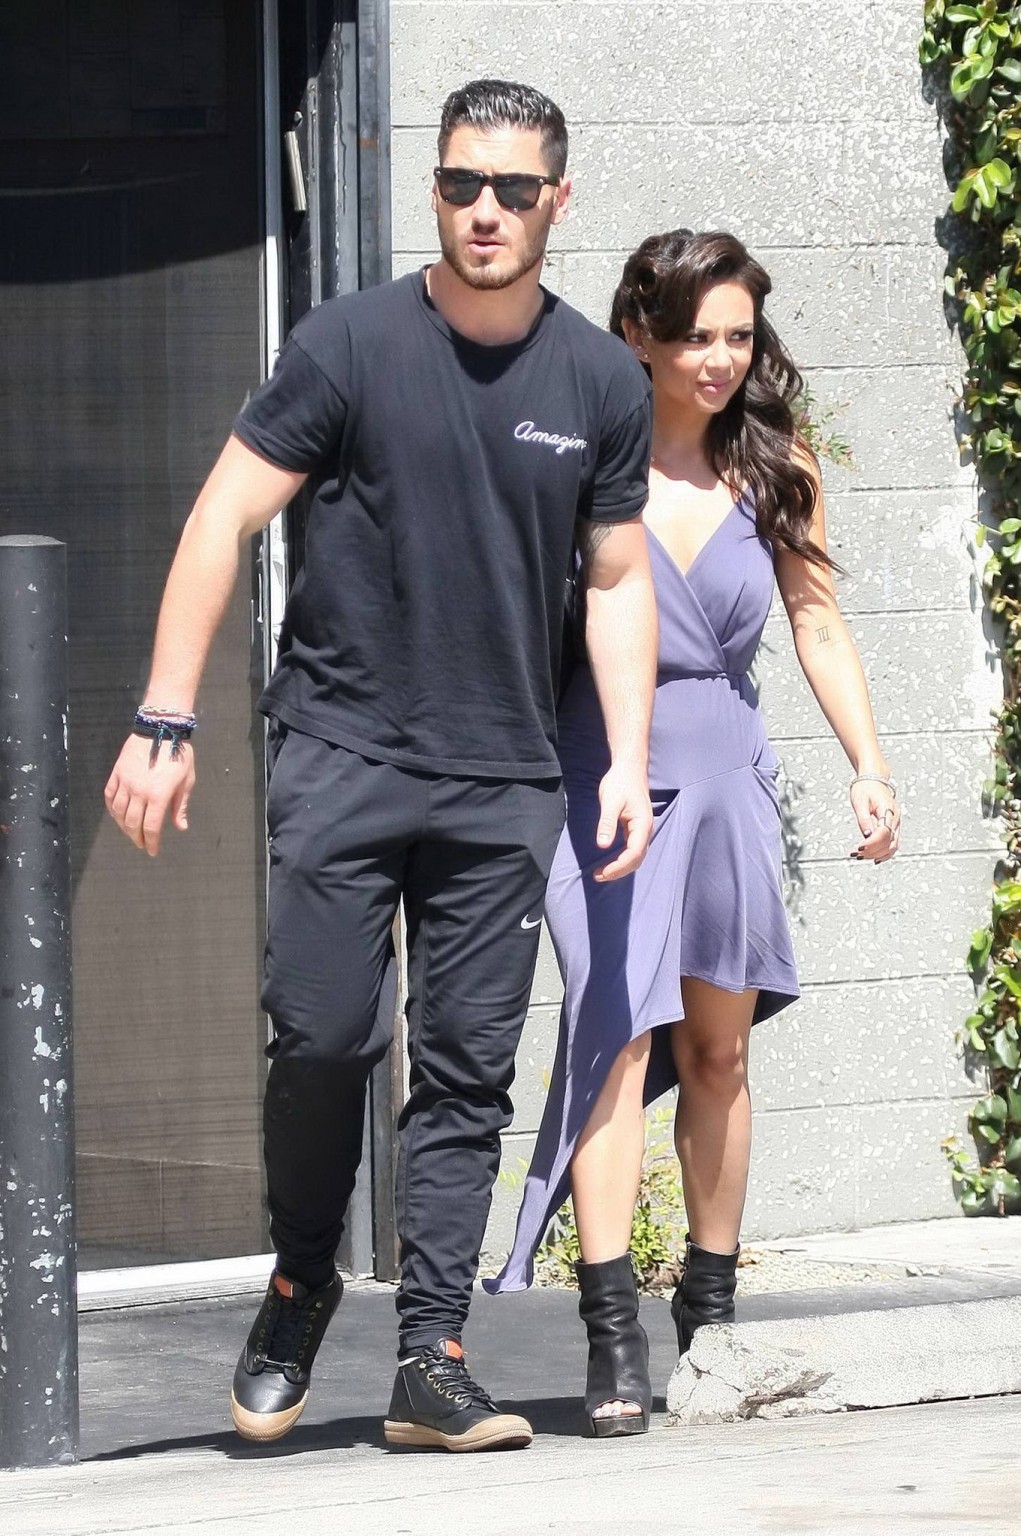 Janel Parrish cleavy and leggy in a short purple dress leaving DWTS Rehearsal in #75185790